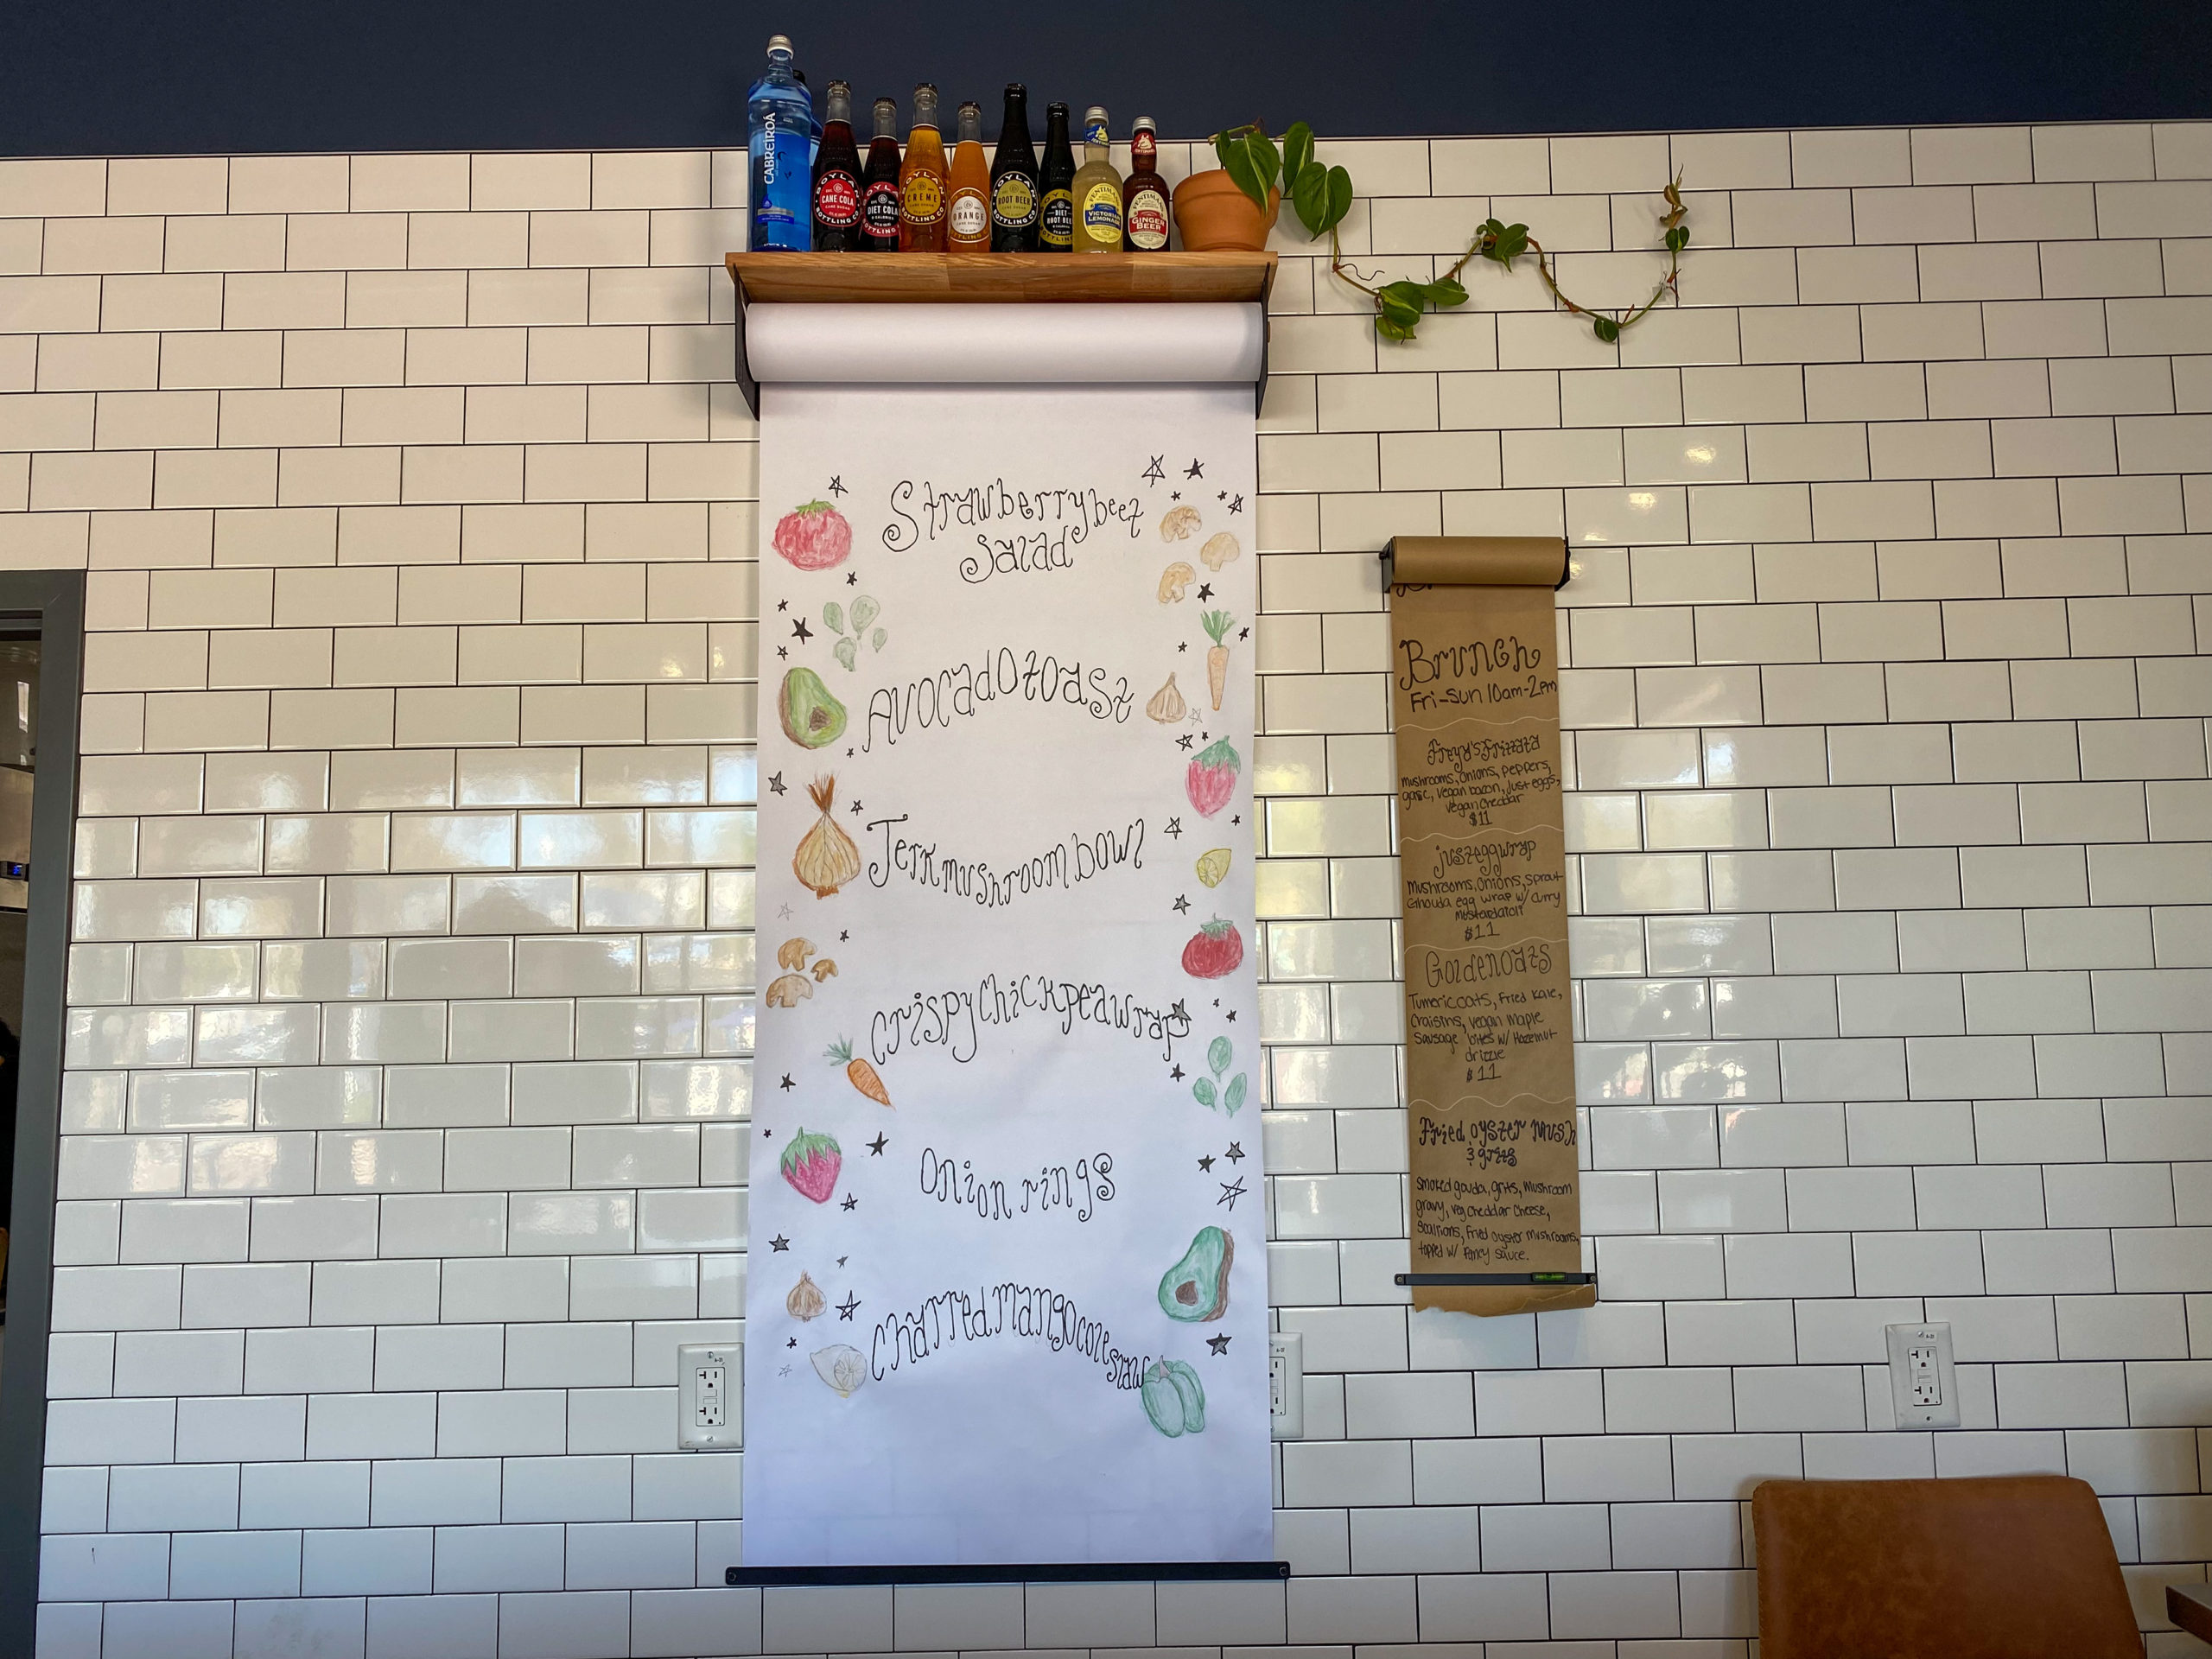 Popular menu & brunch items listed on the back wall behind the counter at Freya's.